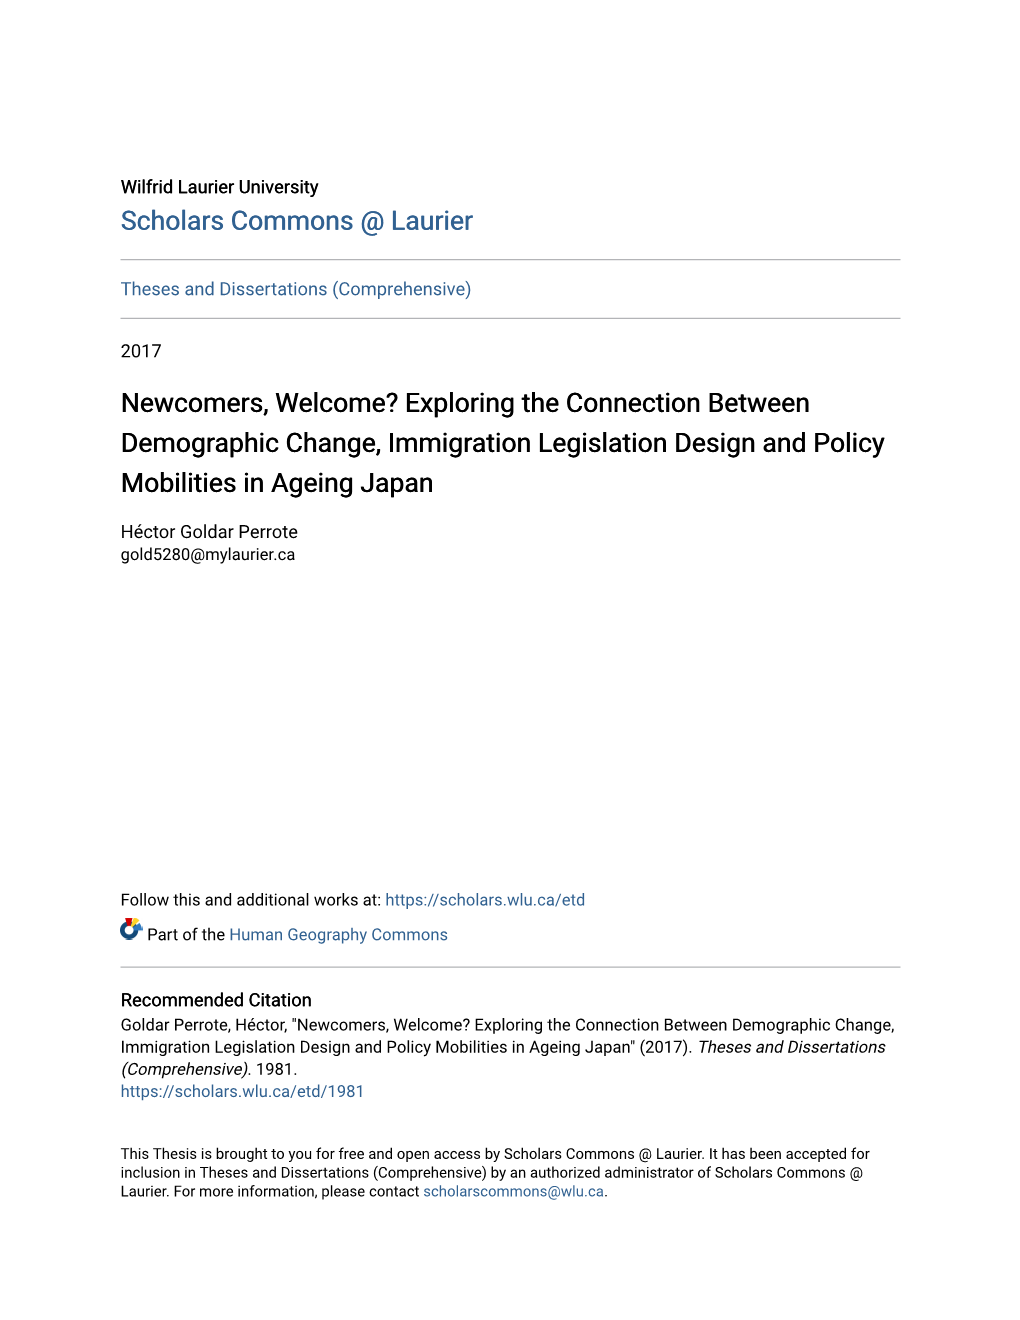 Exploring the Connection Between Demographic Change, Immigration Legislation Design and Policy Mobilities in Ageing Japan